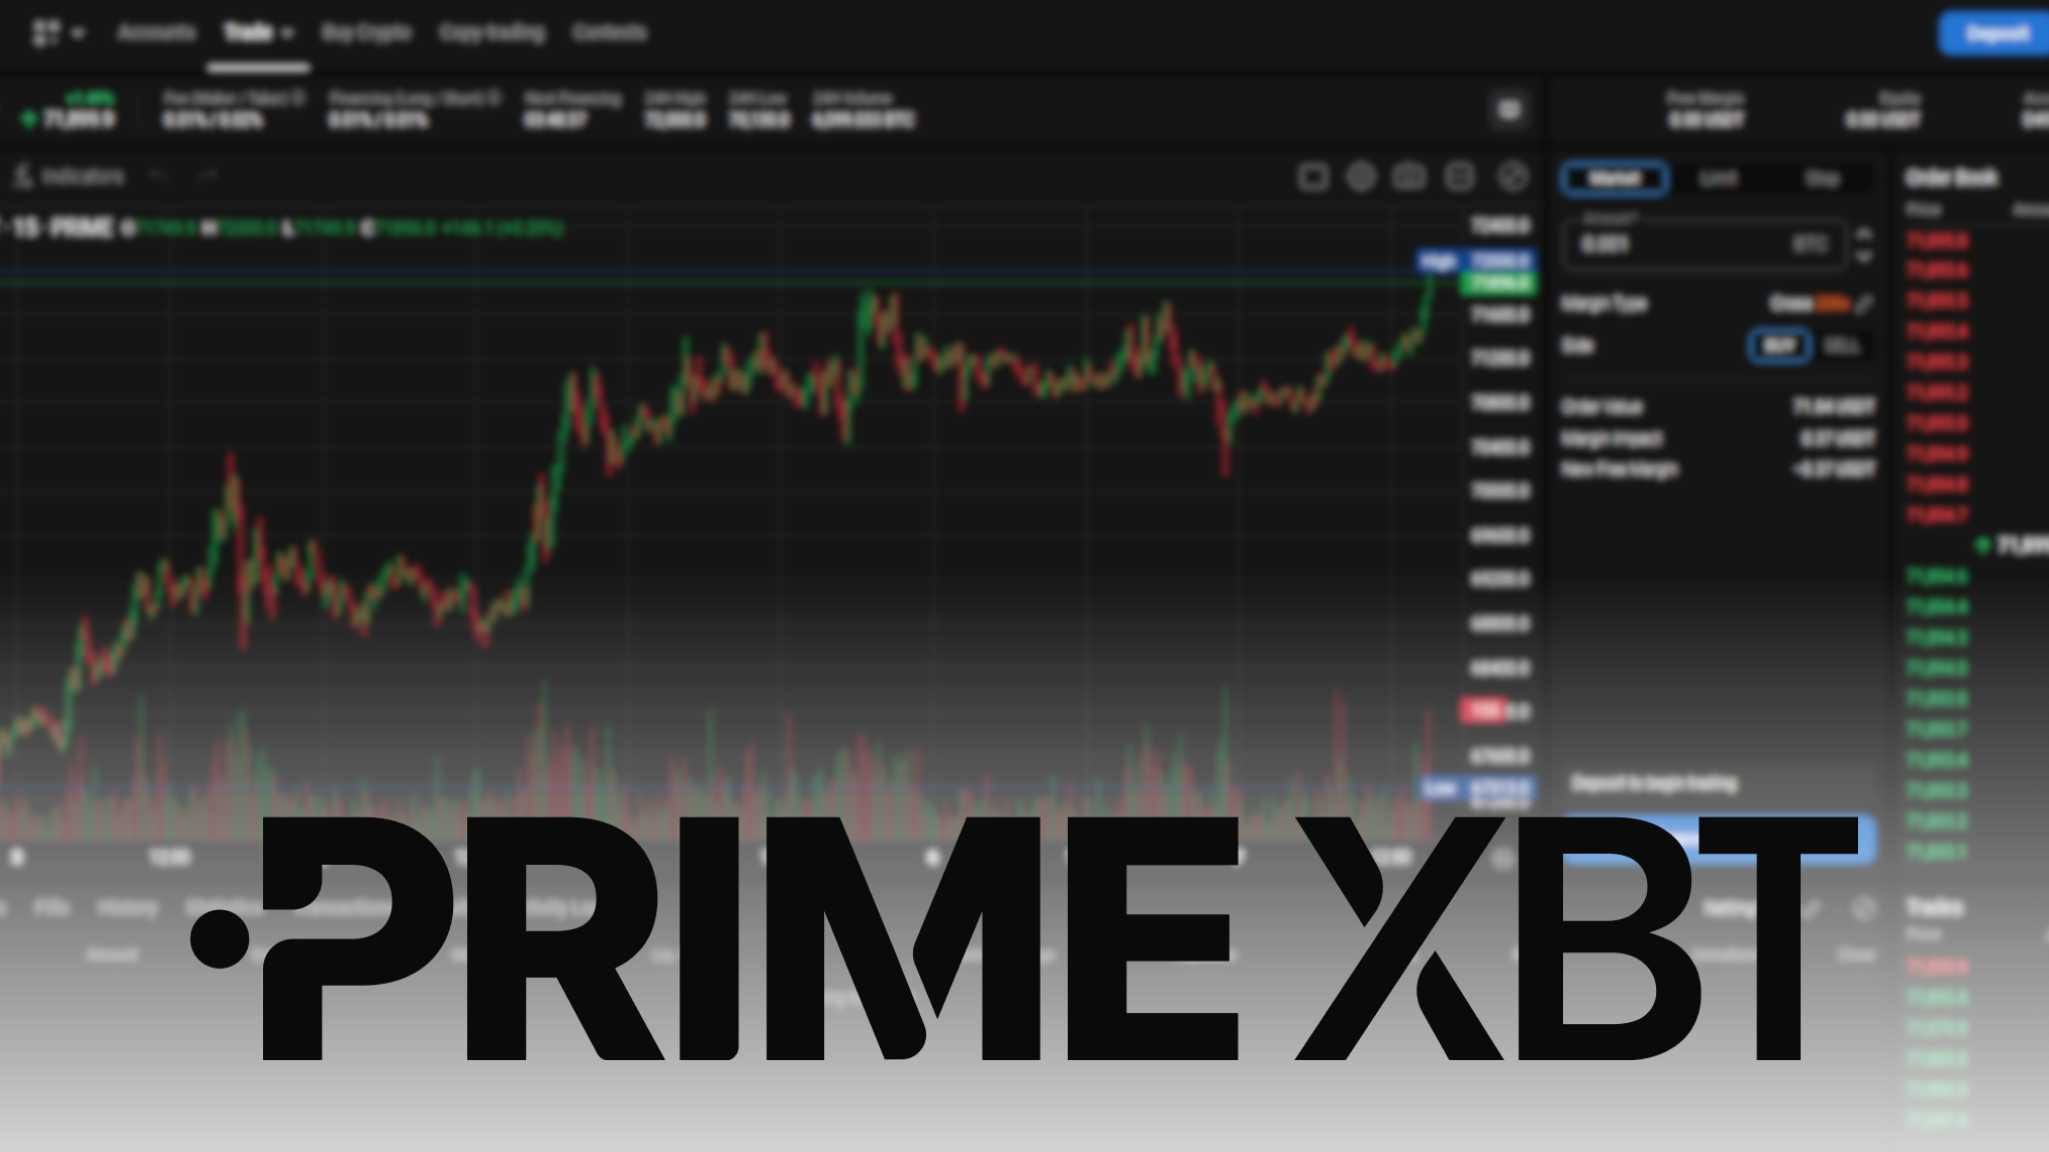 3 More Cool Tools For PrimeXBT Trading Turkey